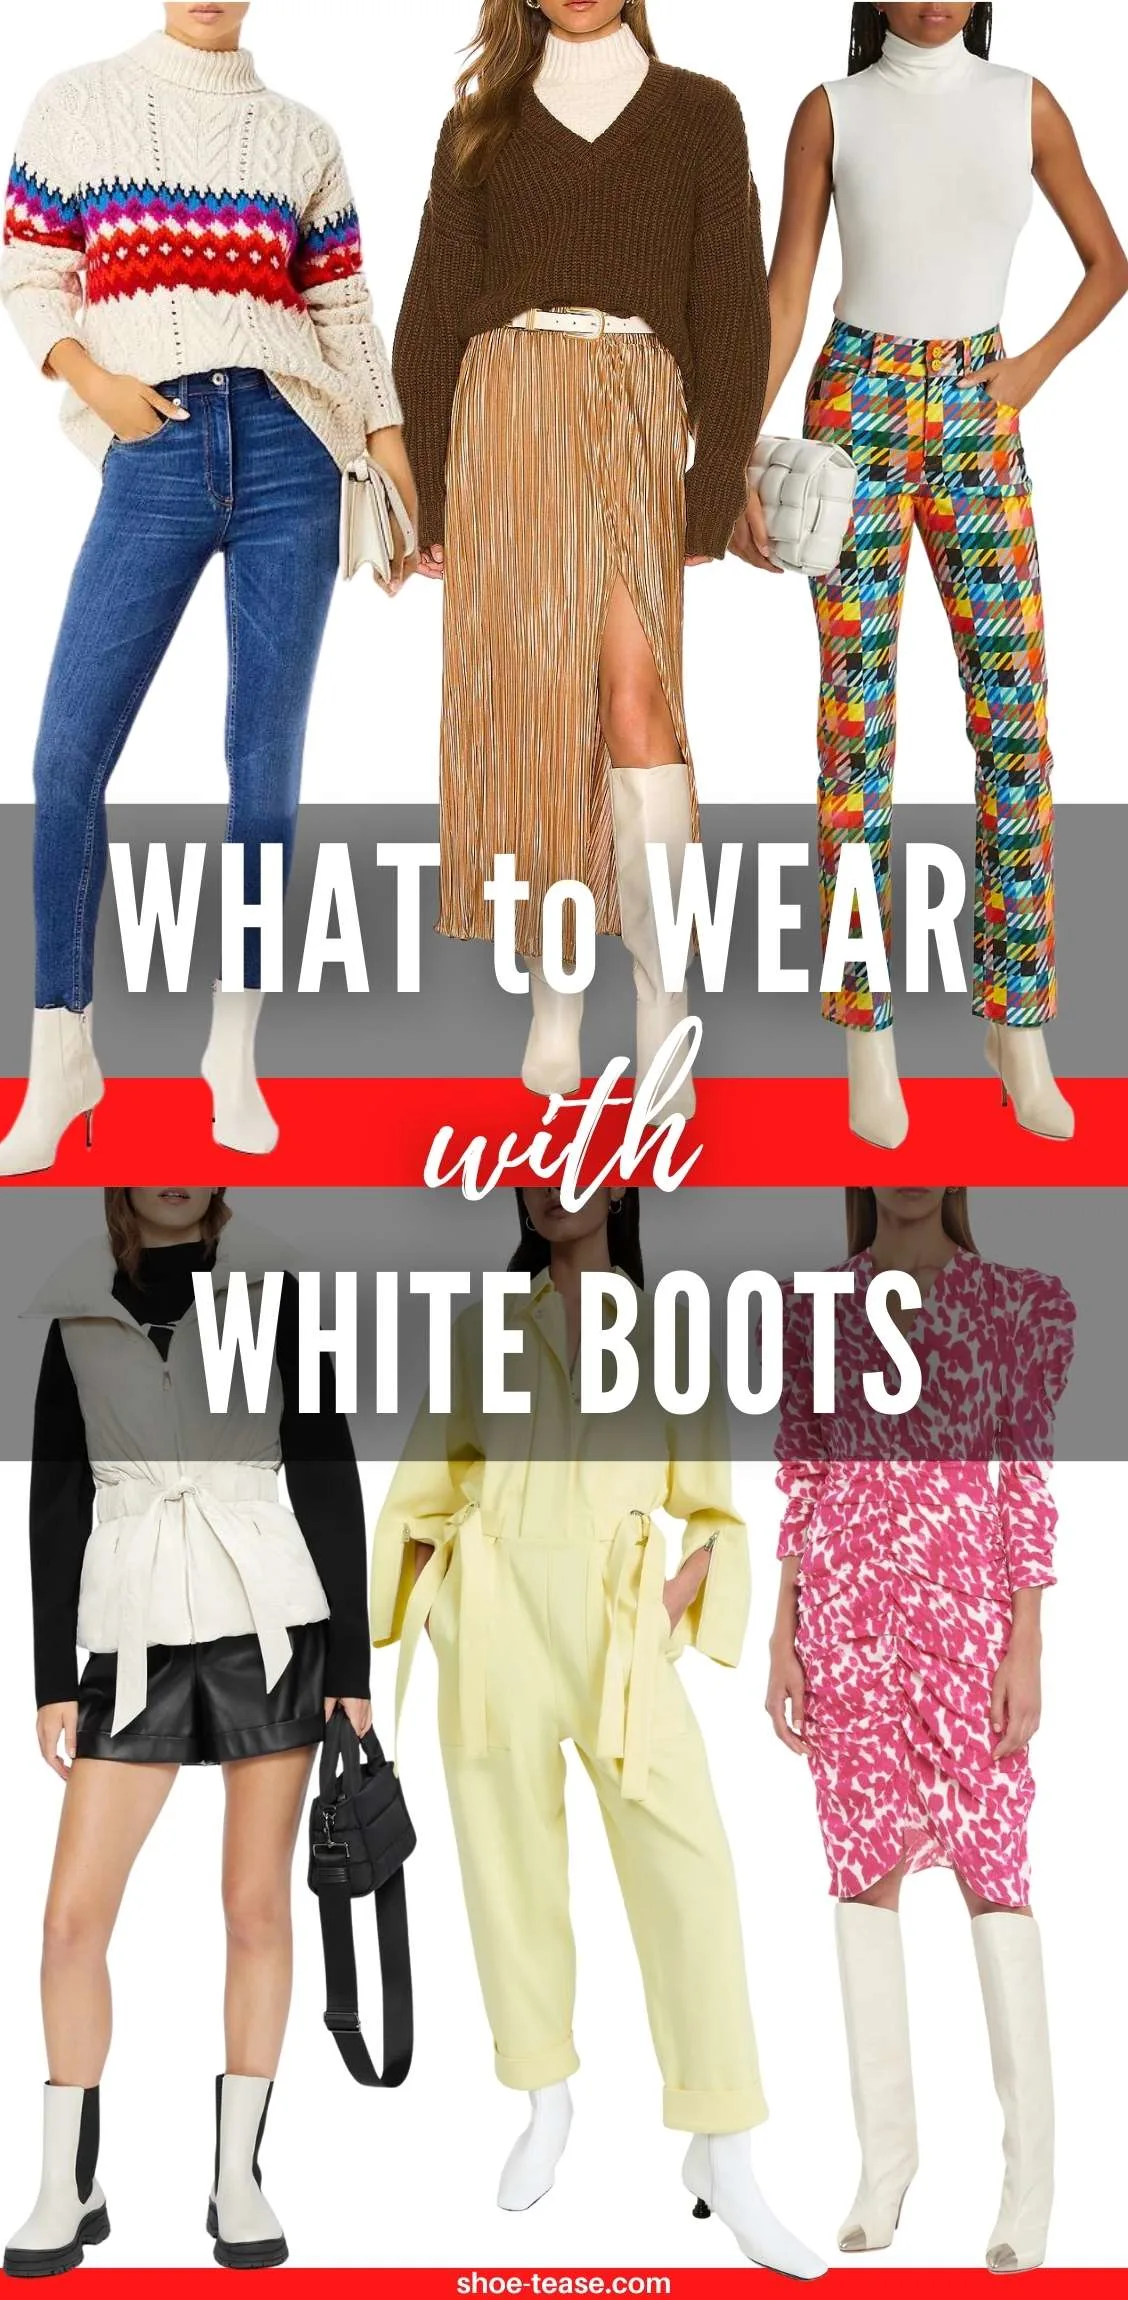 Collage of 6 women wearing different white boots outfits over text reading what to wear with white boots.